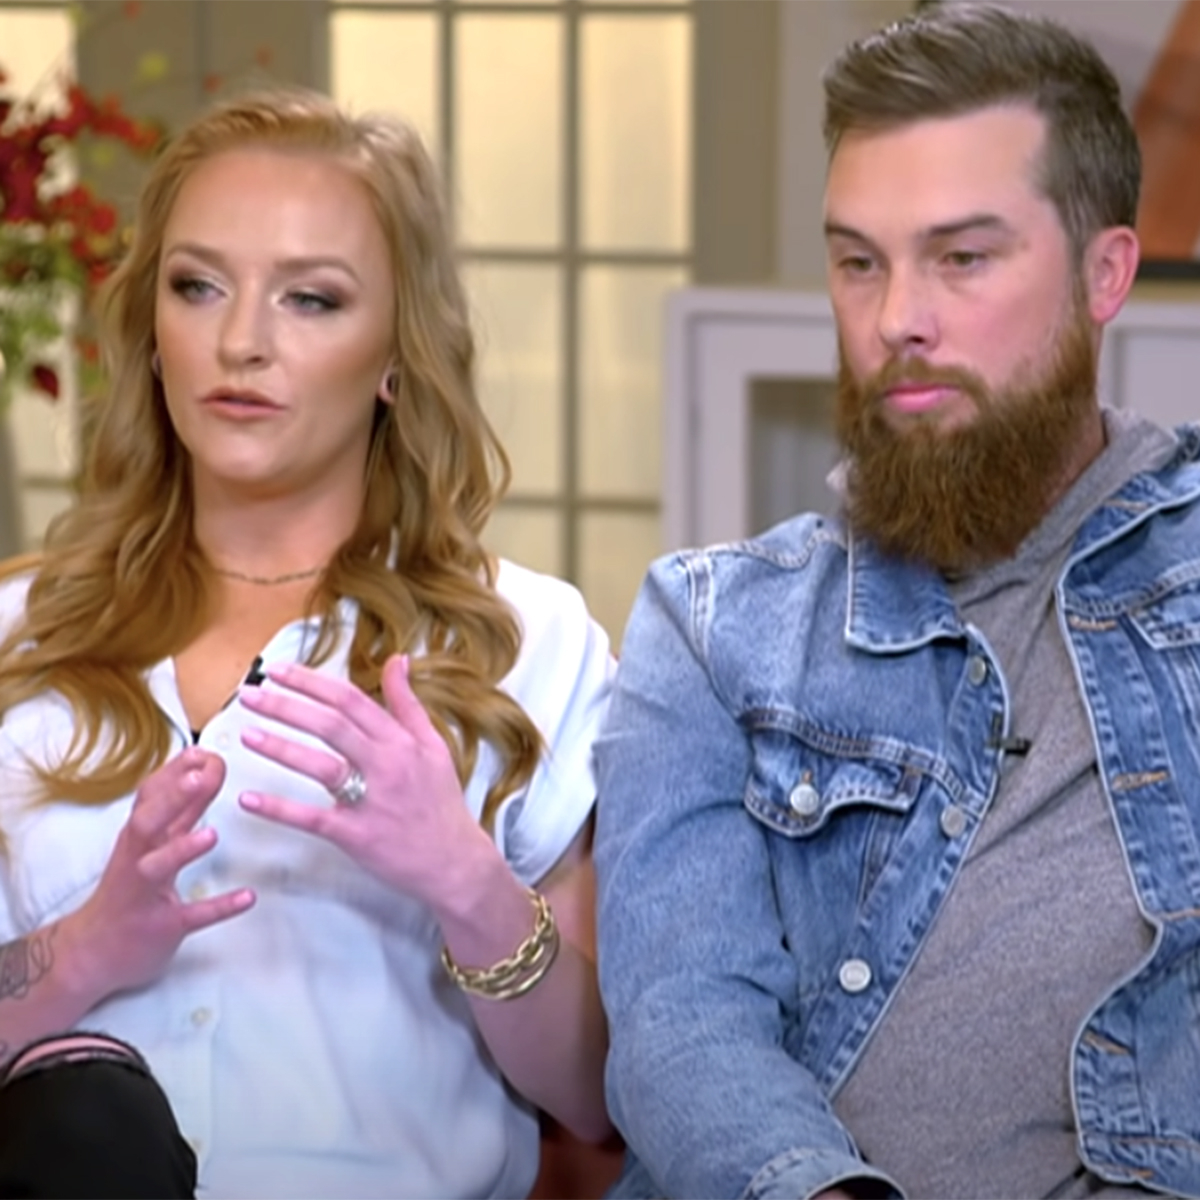 Watch Maci Bookout's Heated Conversation With Ryan Edwards ...